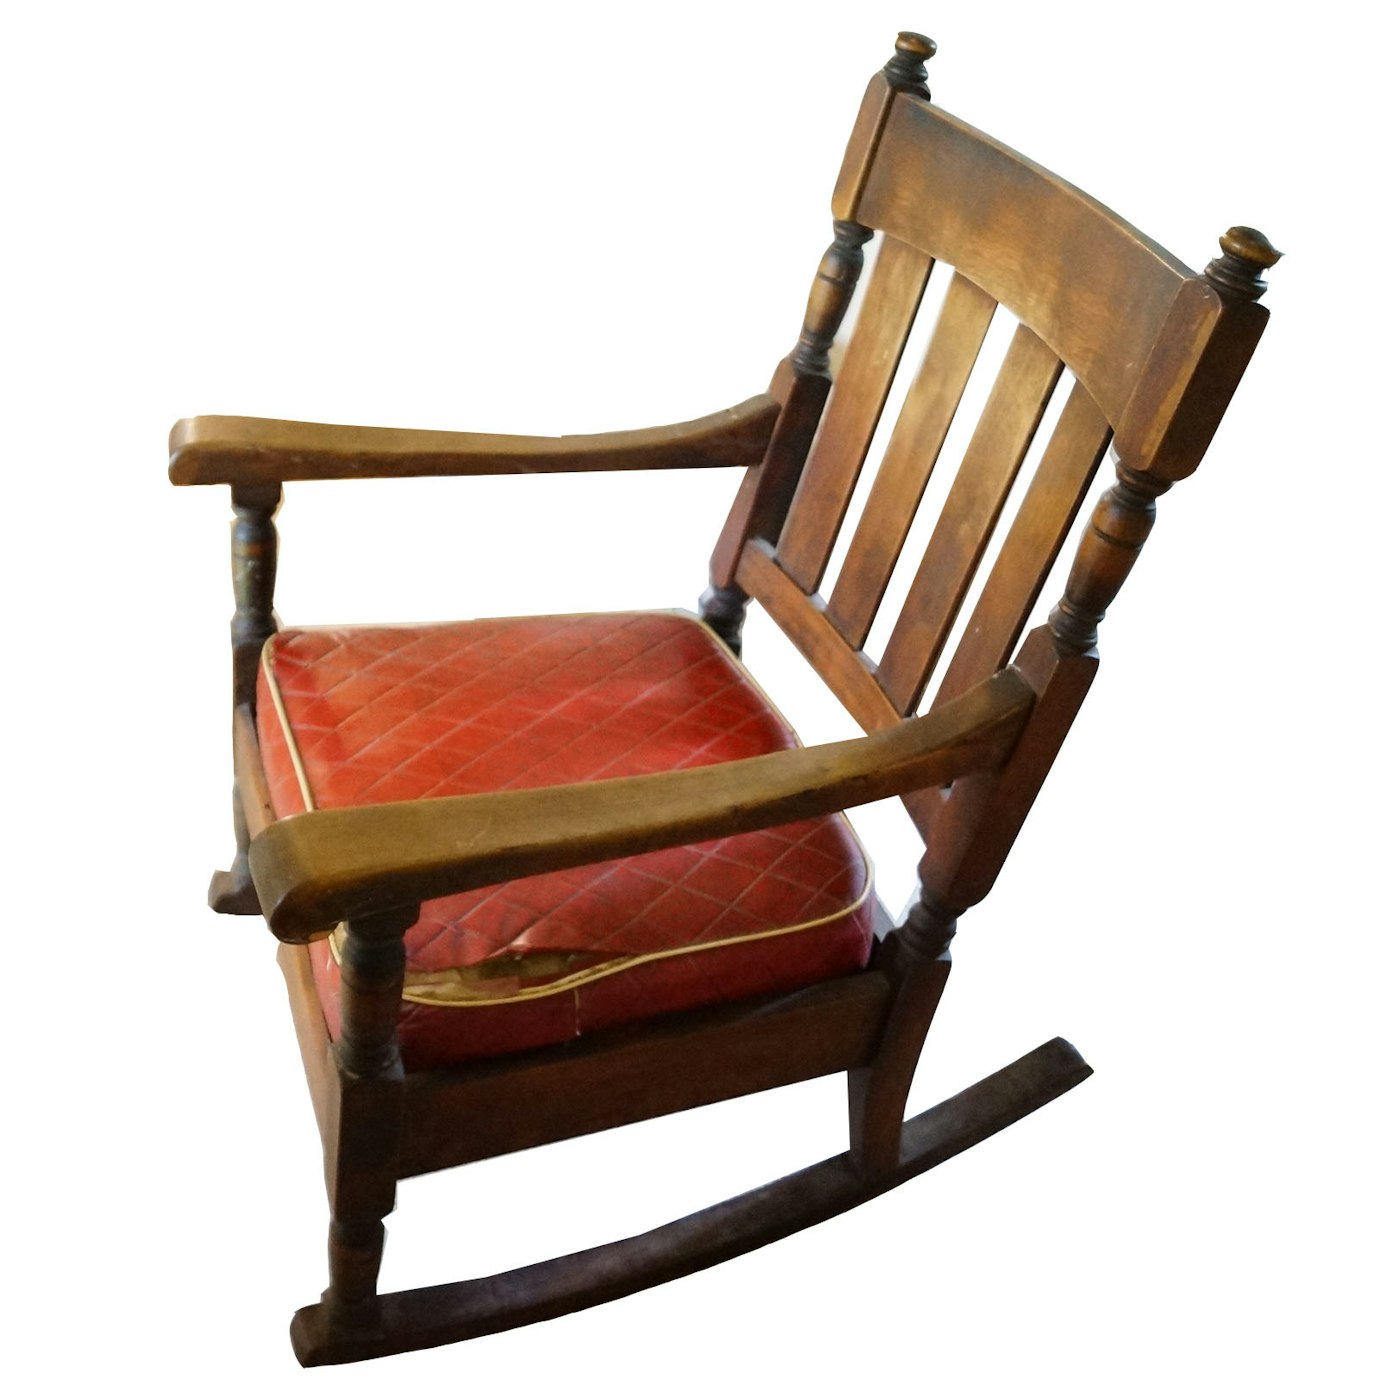 Antique Wood Rocking Chair With Red Cushion Ebth